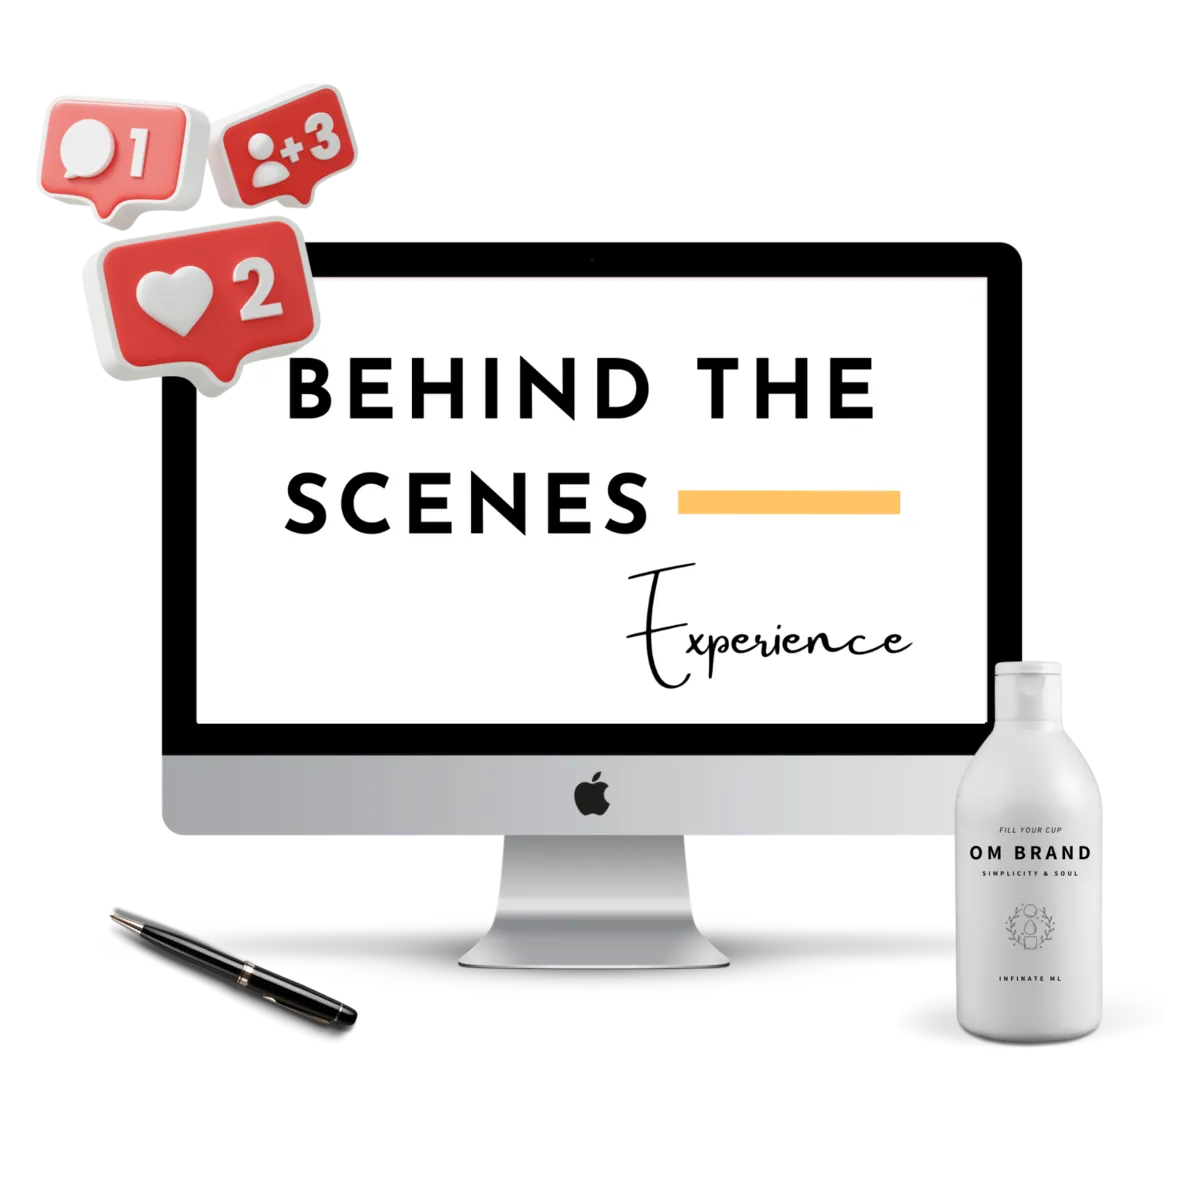 BEHIND THE SCENES EXPERIENCE - From Idea to Creation to Offer to Sell